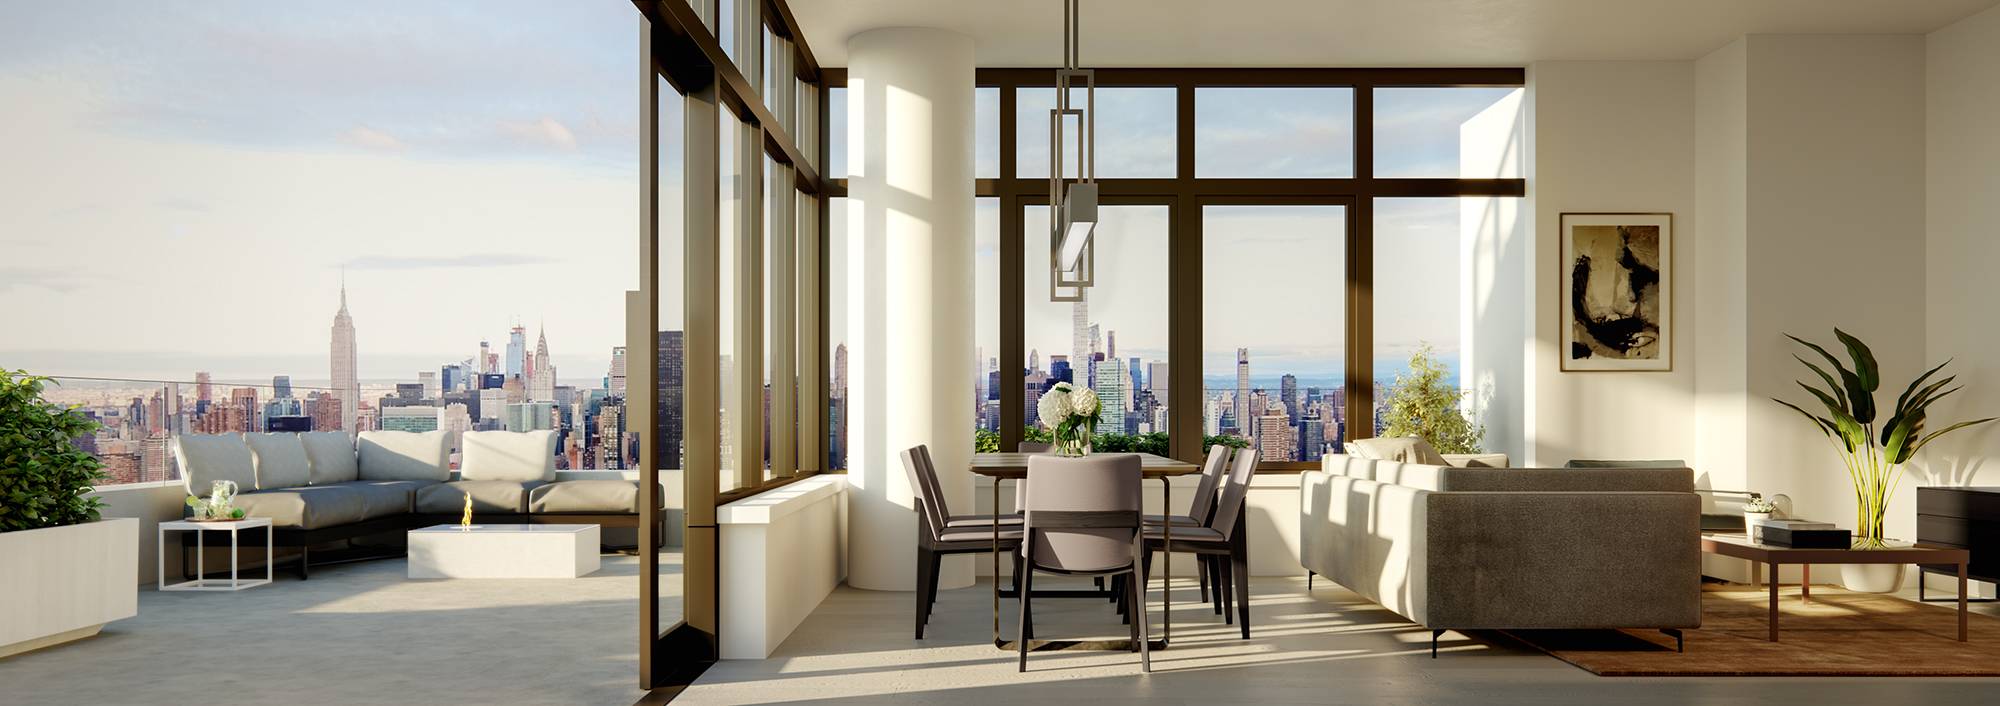 A Towering Monument to Excellence. Luxury Elevated to New Heights. Welcome to Skyline Tower.